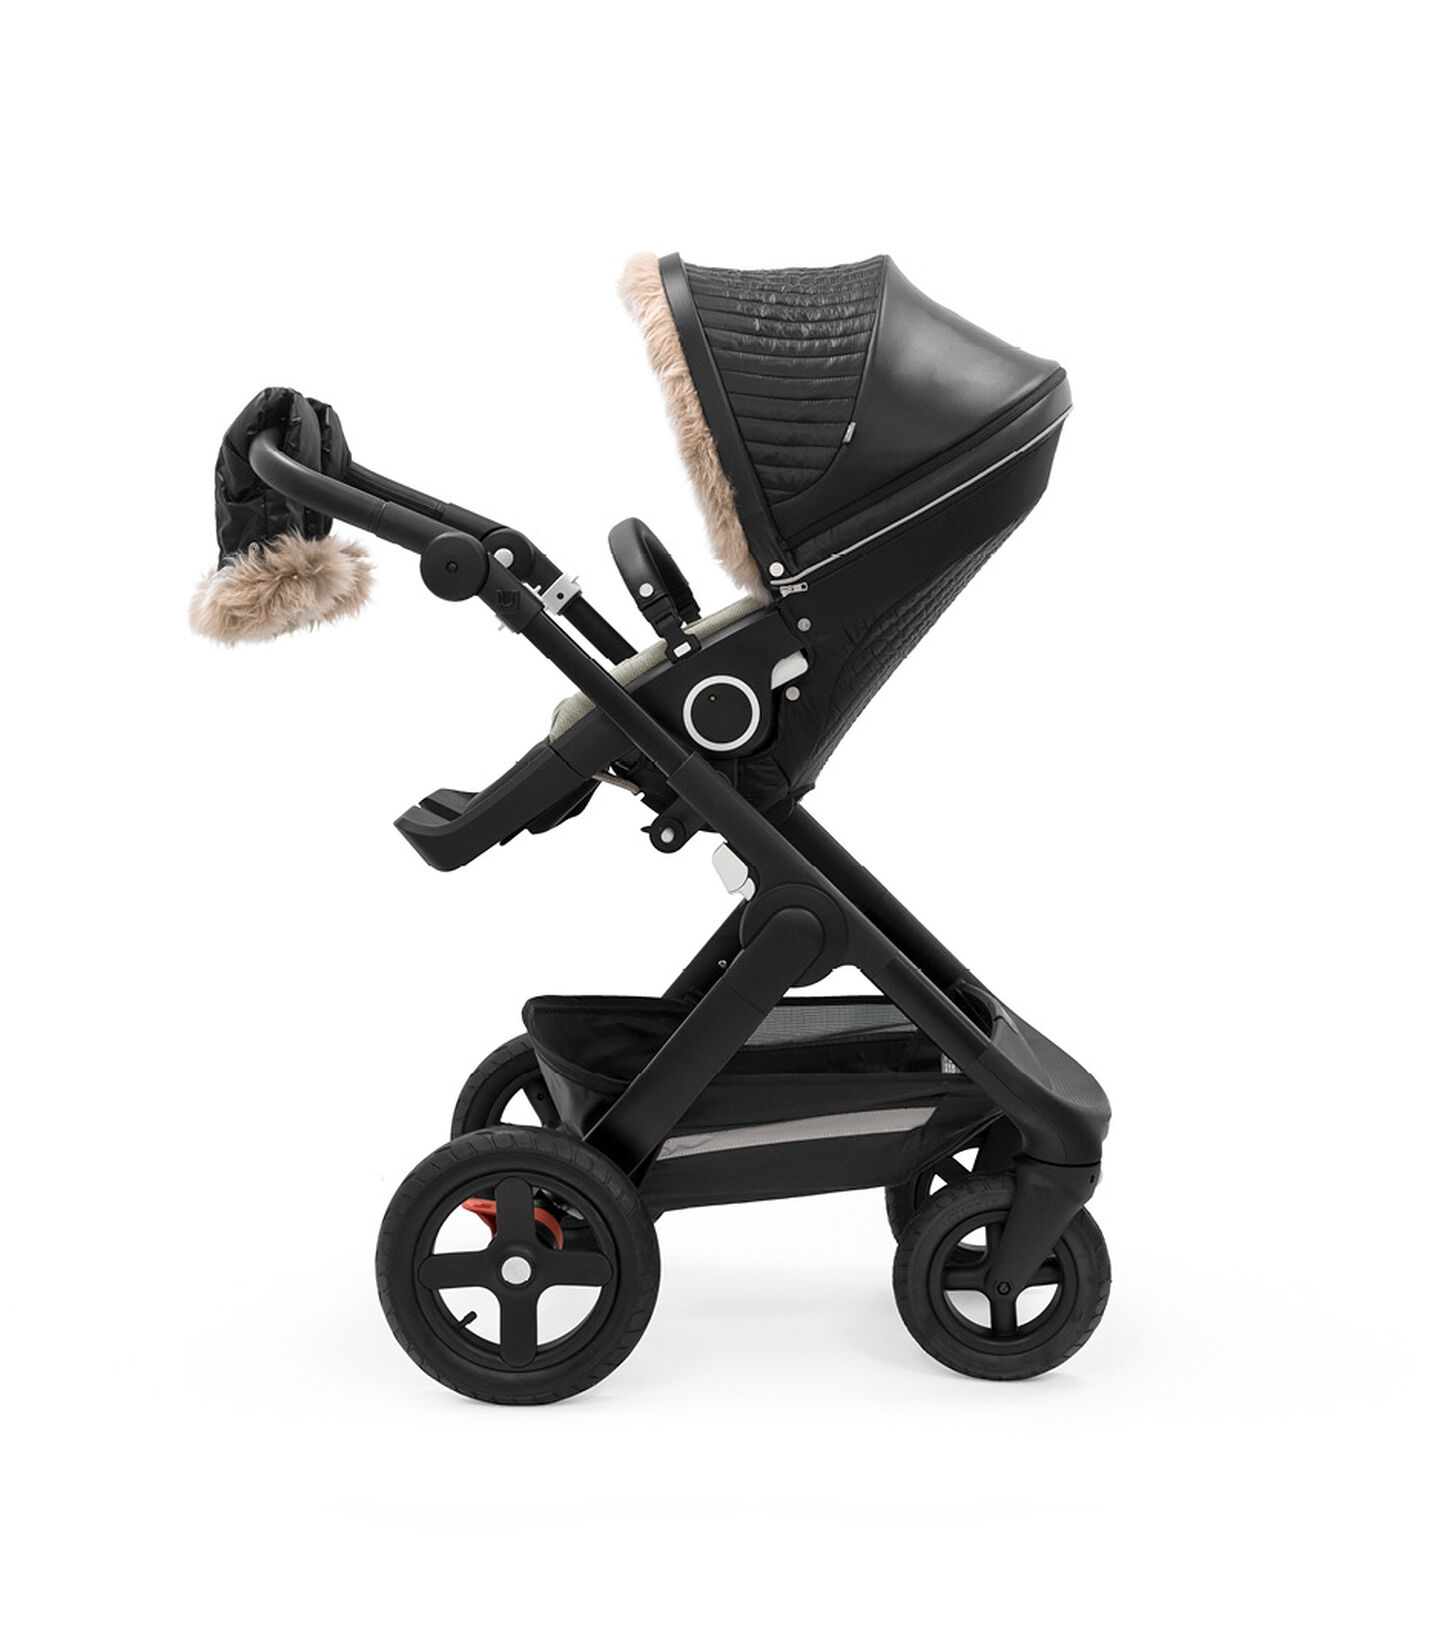 Stokke® Stroller Mittens Onyx Black, 瑪瑙黑色, mainview view 4